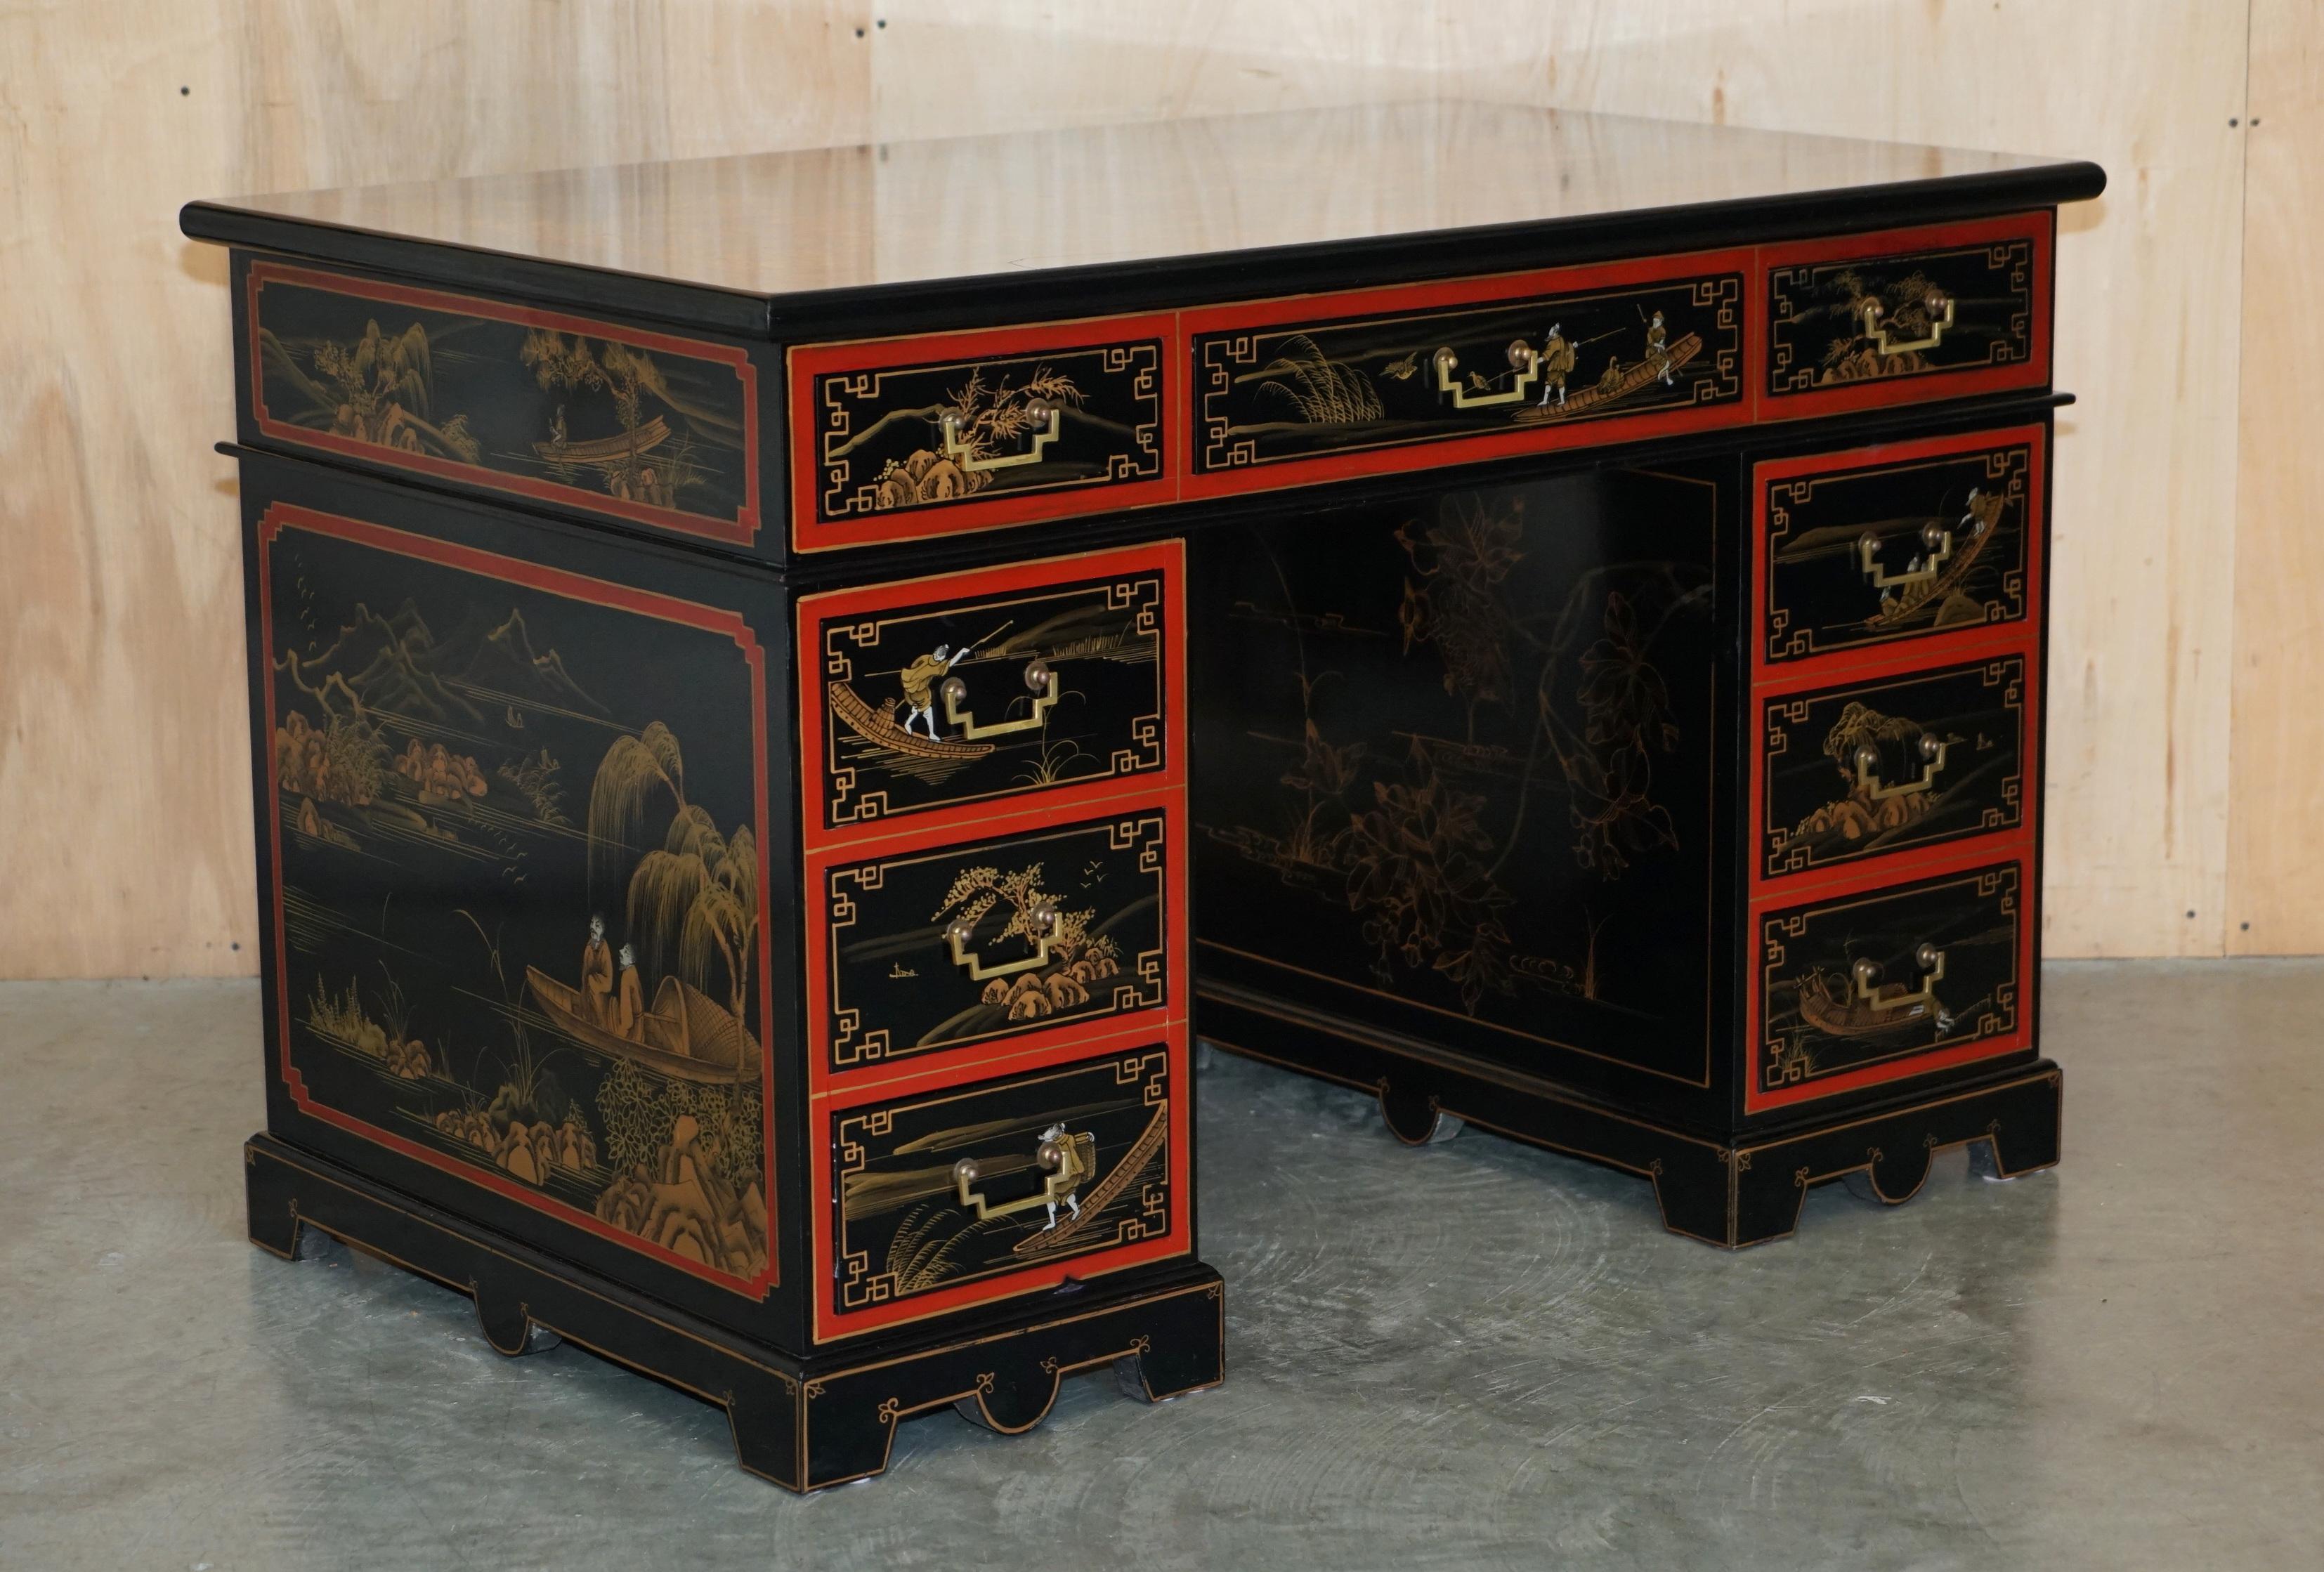 Chinoiserie VINTAGE CHiNESE CHINOISERIE DECORATED PAINTED & LACQUERED PEDESTAL DESK & CHAIR For Sale